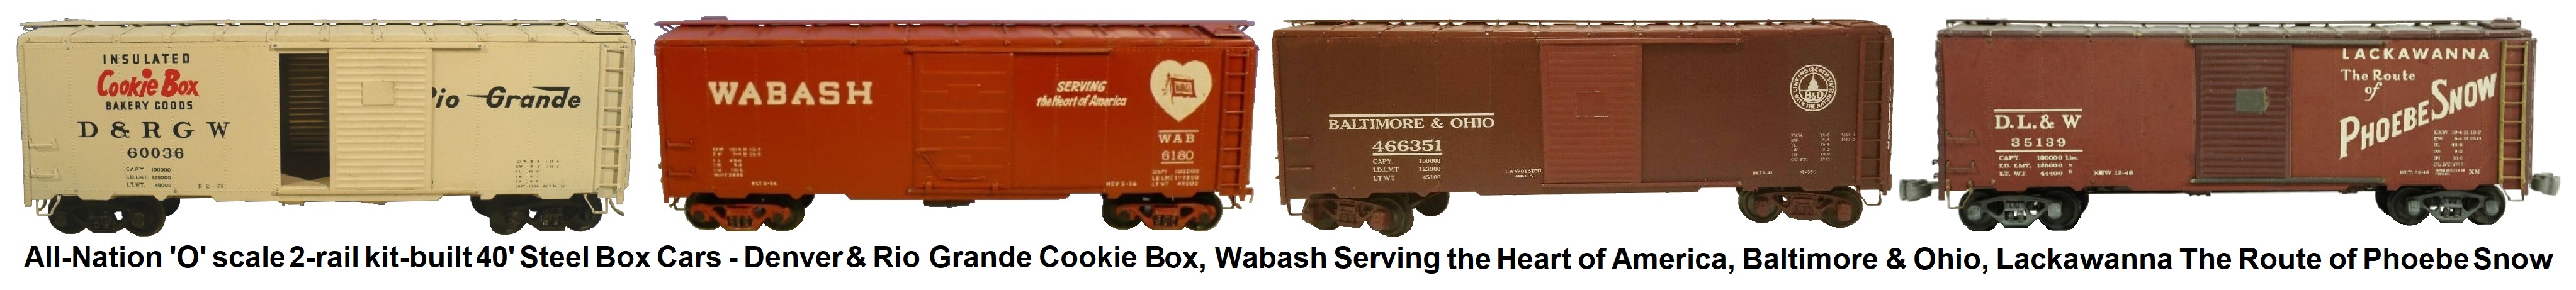 All-Nation 'O' scale 2-rail Kit-built 40' Steel Box Cars - #6623 Rio Grande Cookie Box, #6622 Wabash Serving the Heart of America, #3622 Baltimore & Ohio, #6613 D.L.&W. Lackawanna The Route of Phoebe Snow